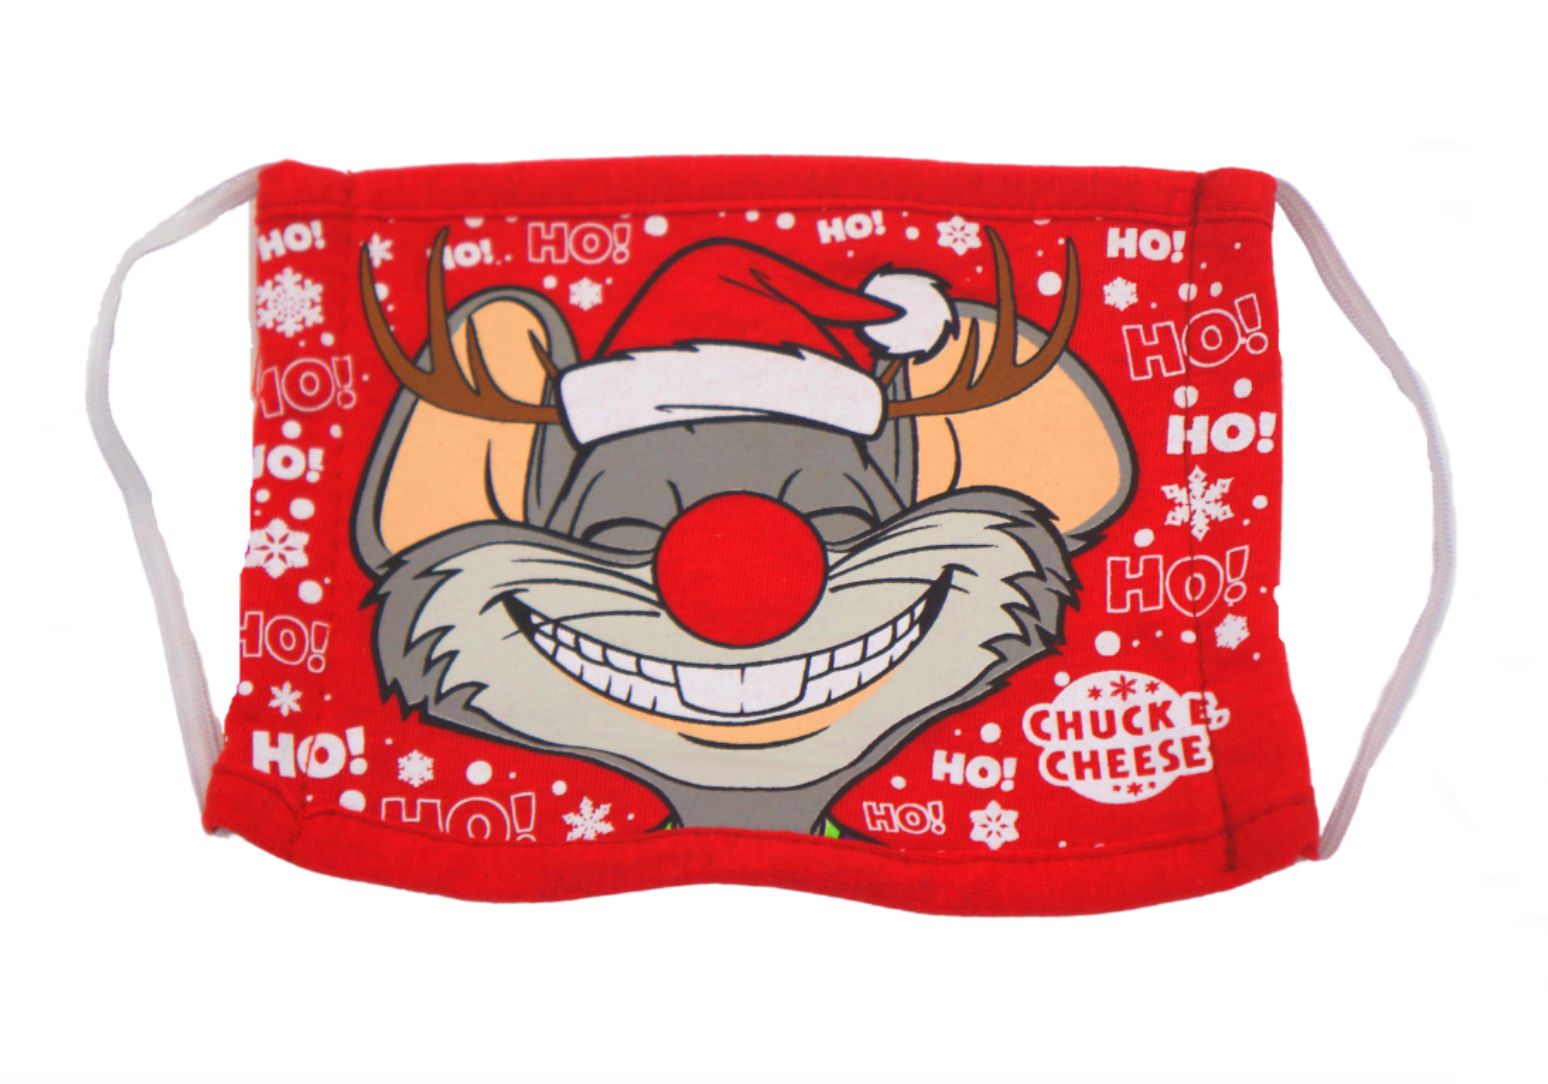 New Festive Chuck E. Cheese Face Masks for Kids Available for a Limited Time Only